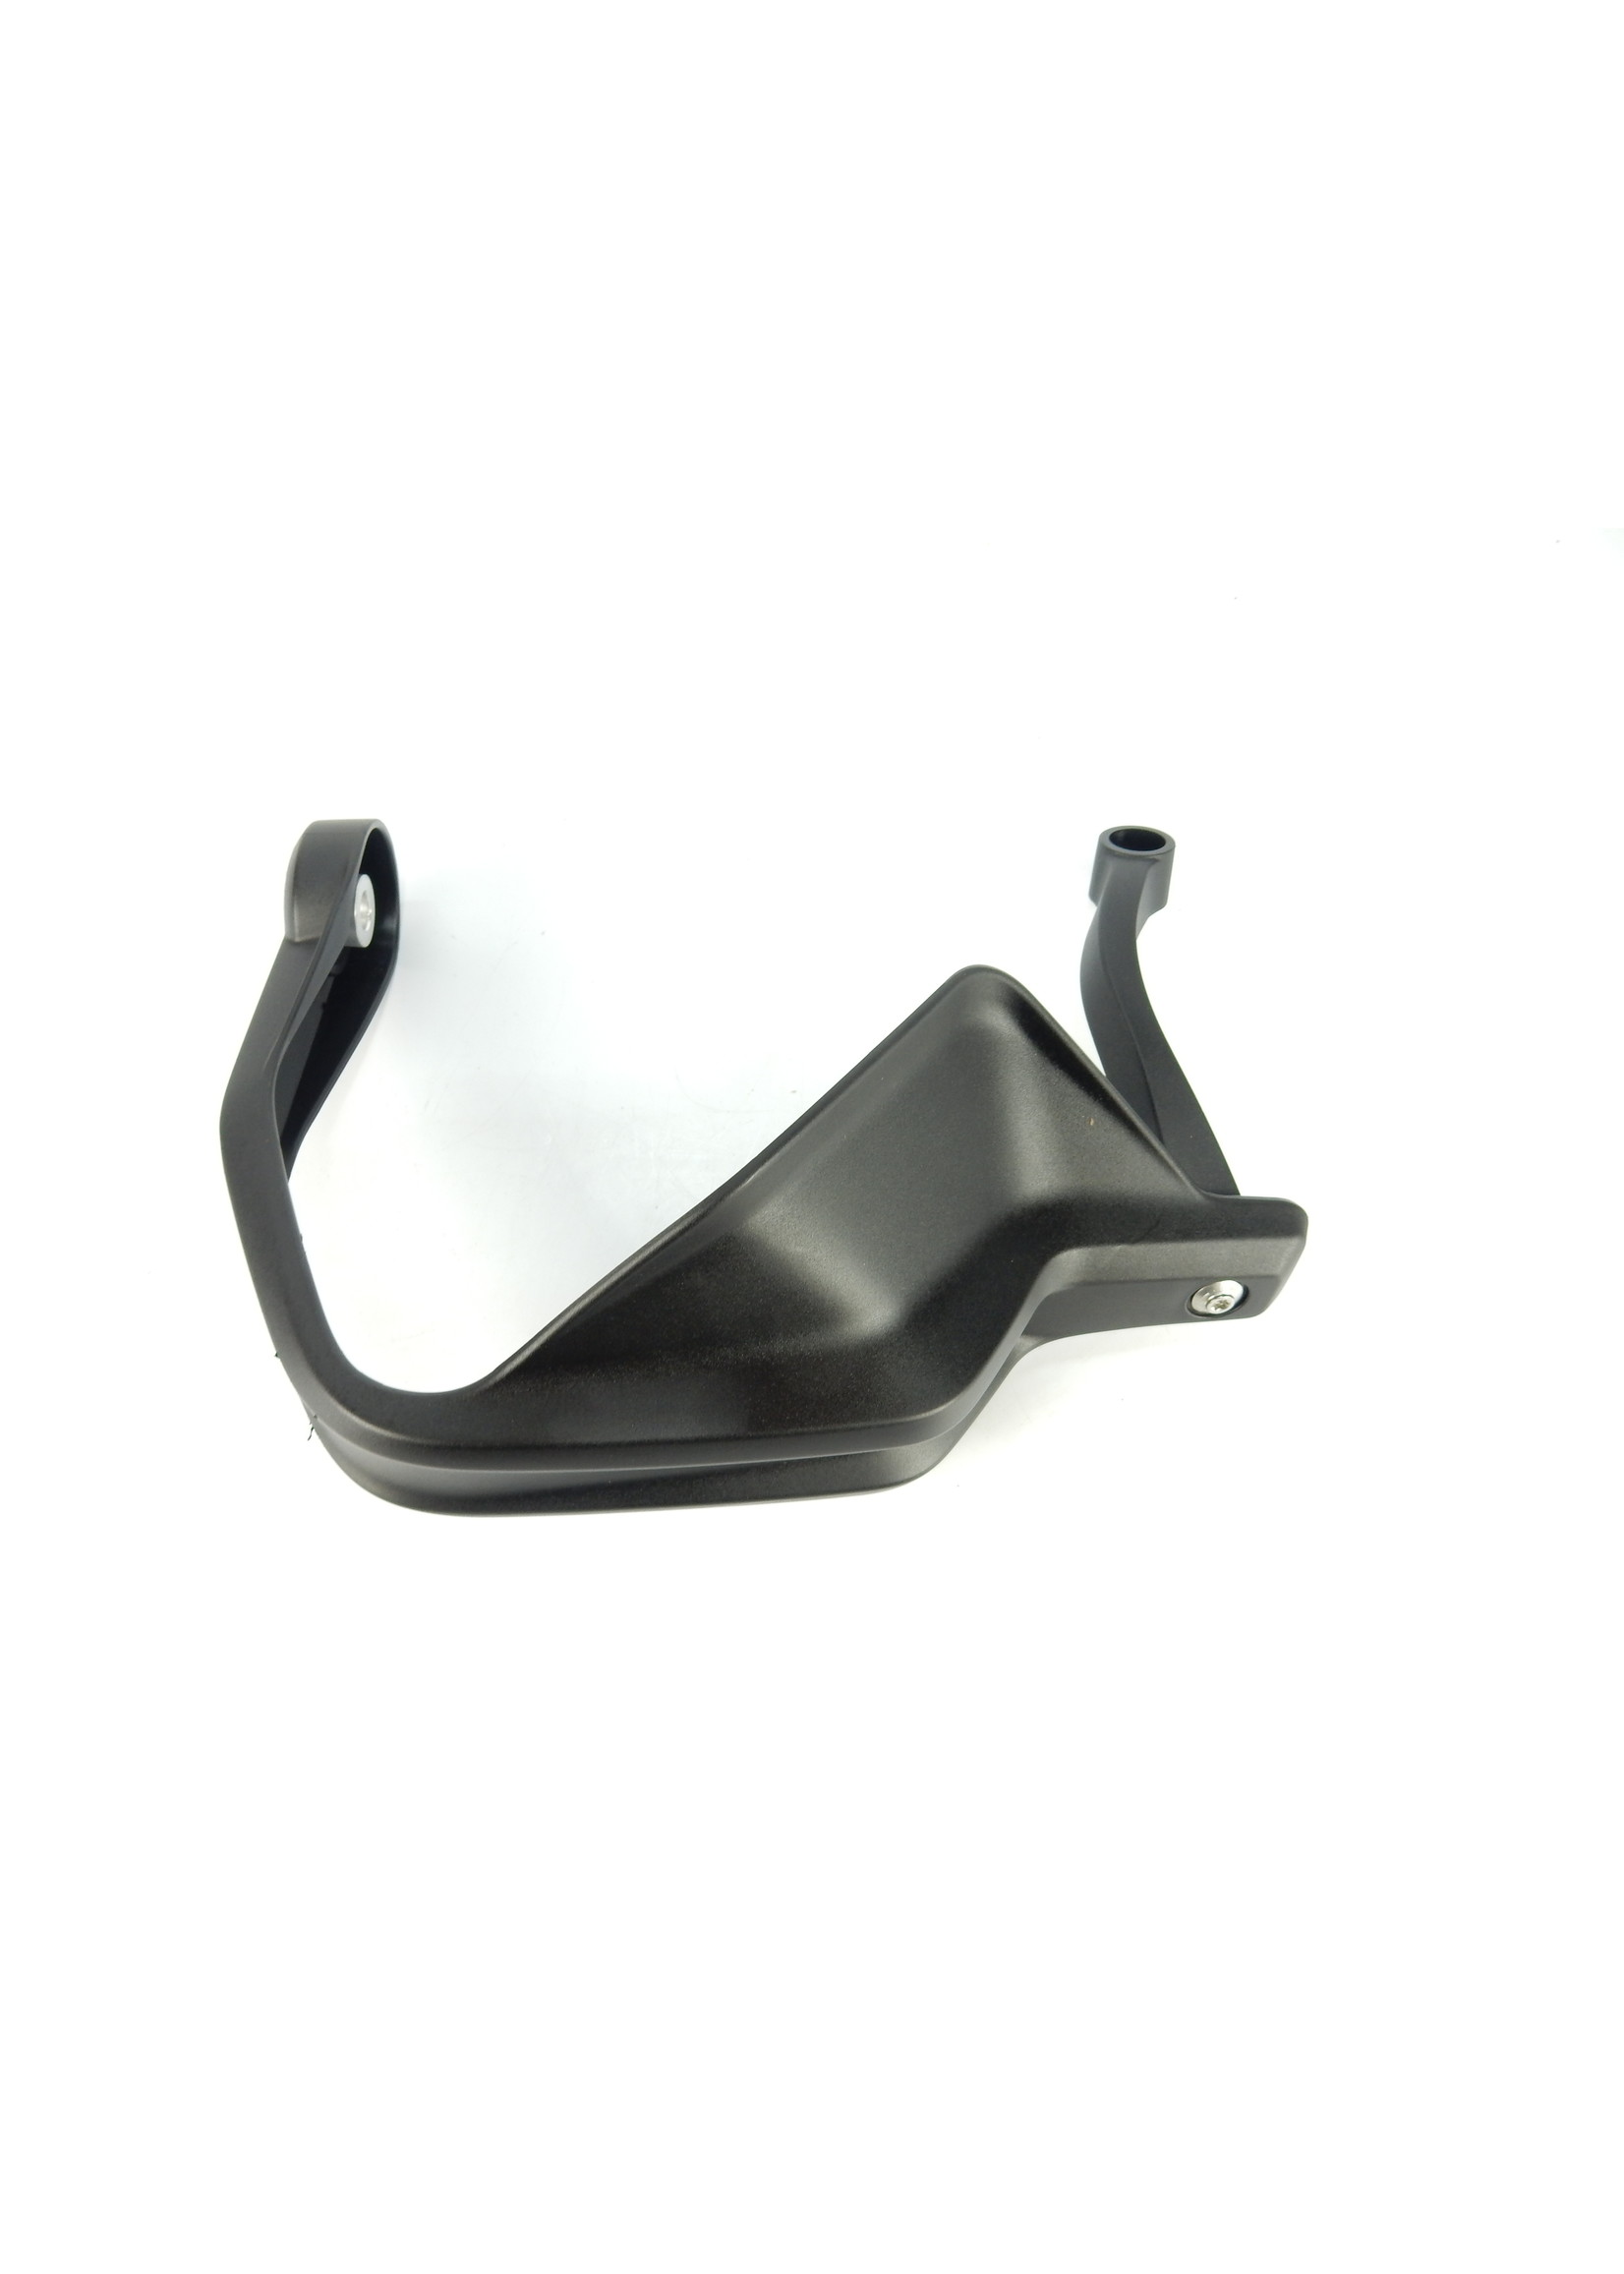 BMW BMW F 850 GS Adventure Hand protector right